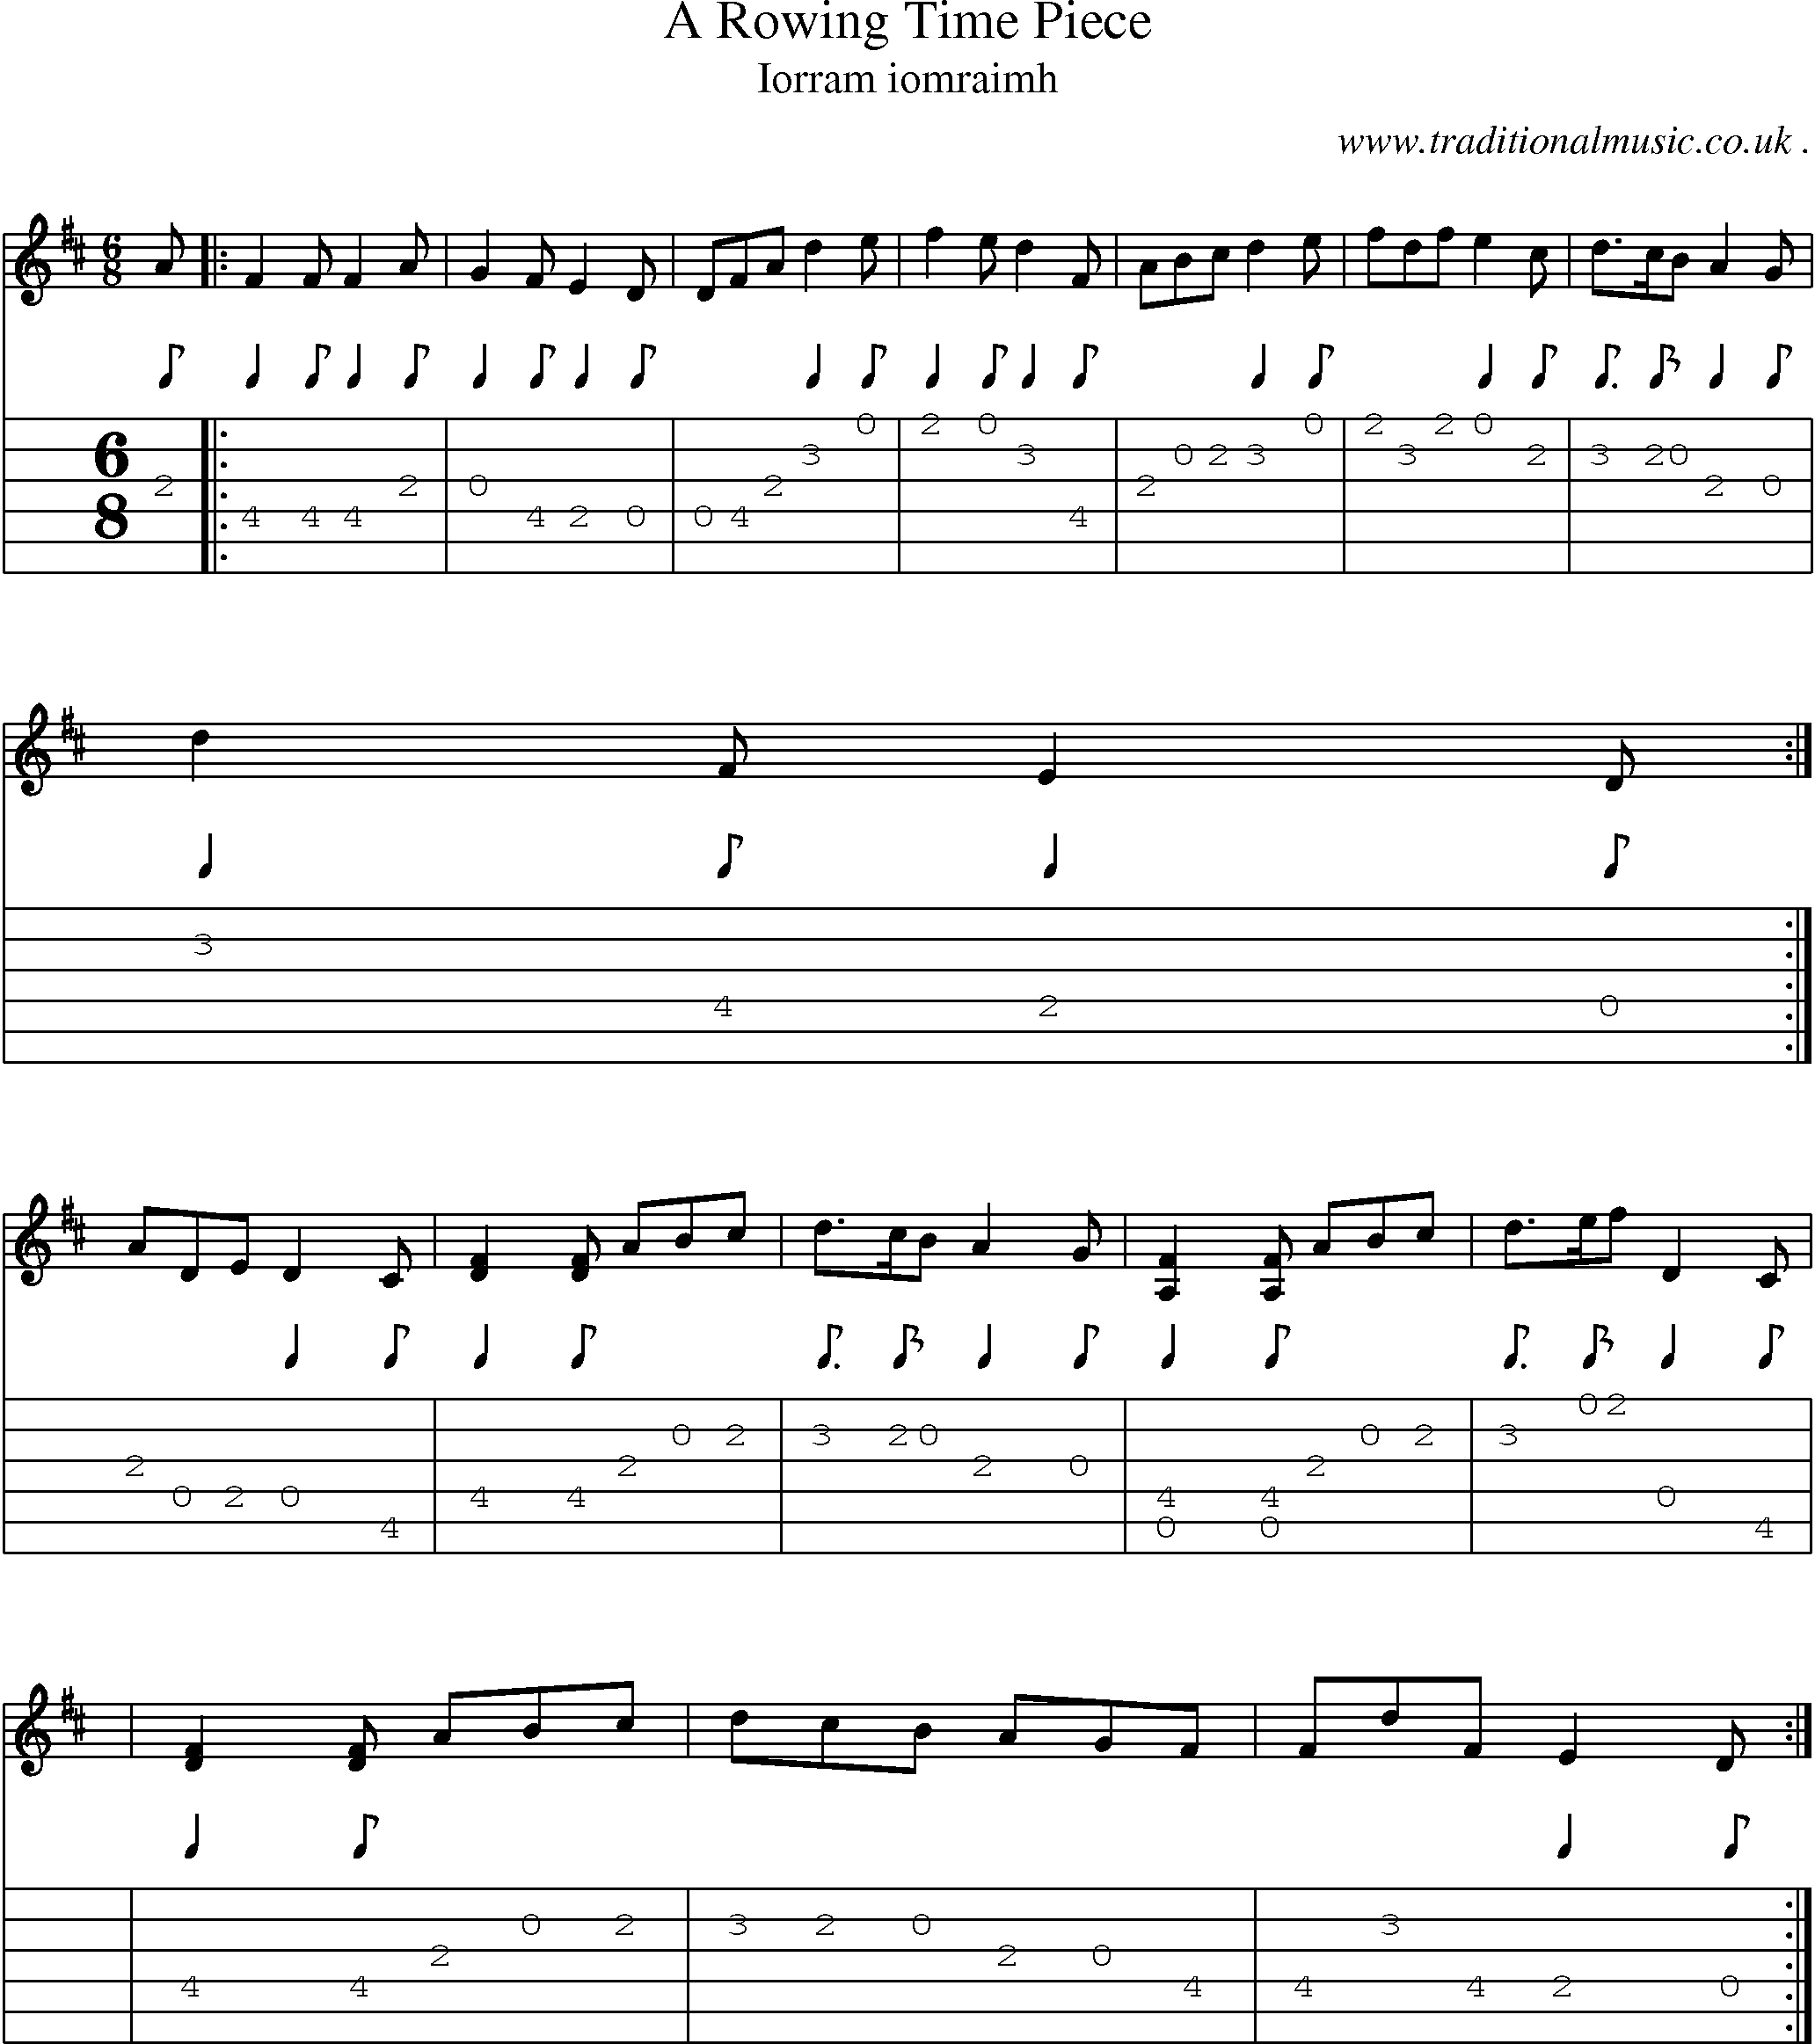 Sheet-music  score, Chords and Guitar Tabs for A Rowing Time Piece